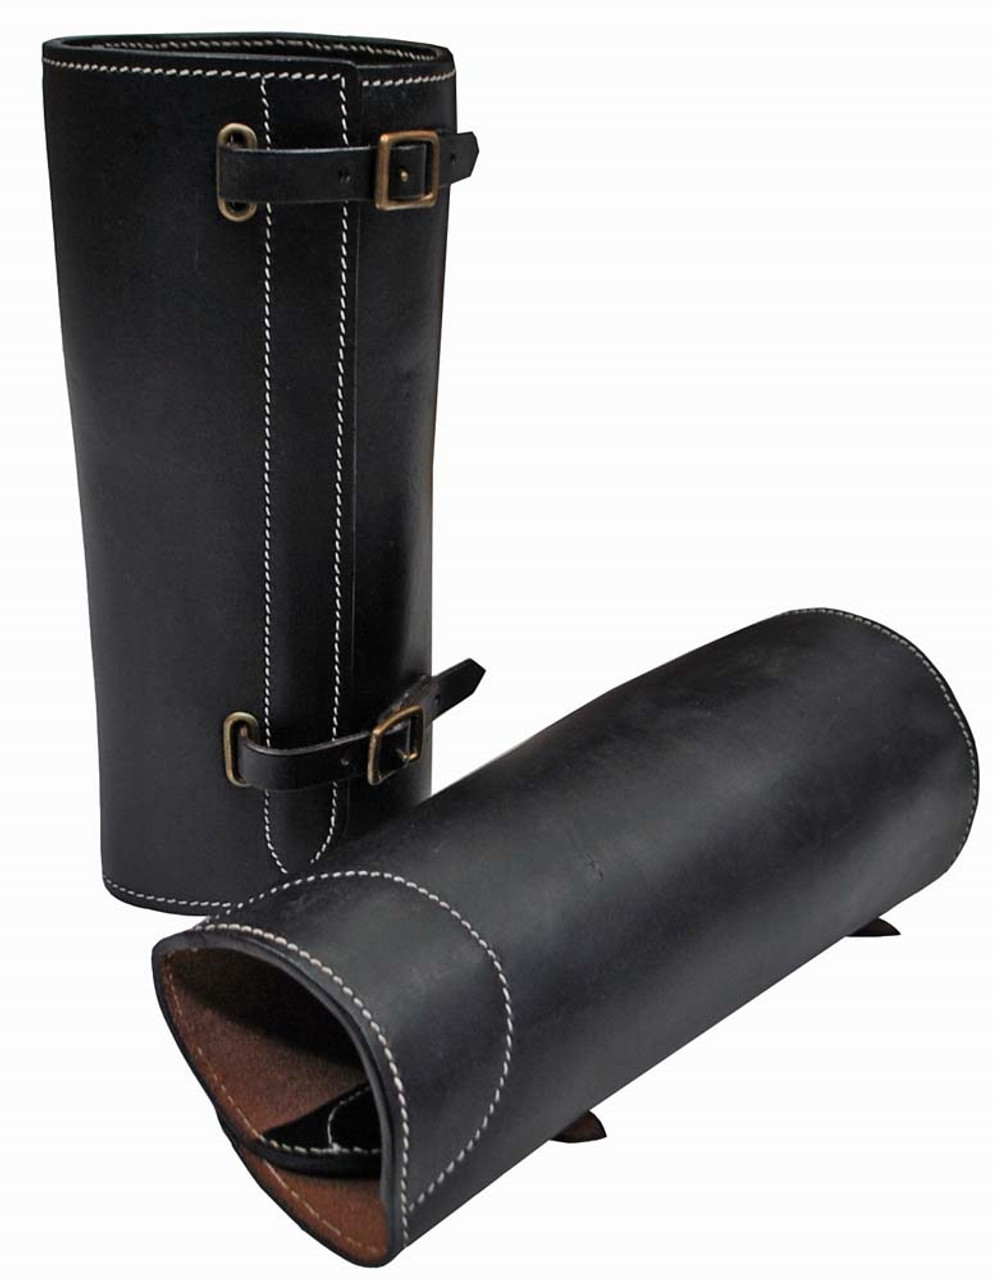 WWI German Officer's Black Leather Gaiters from Hessen Antique